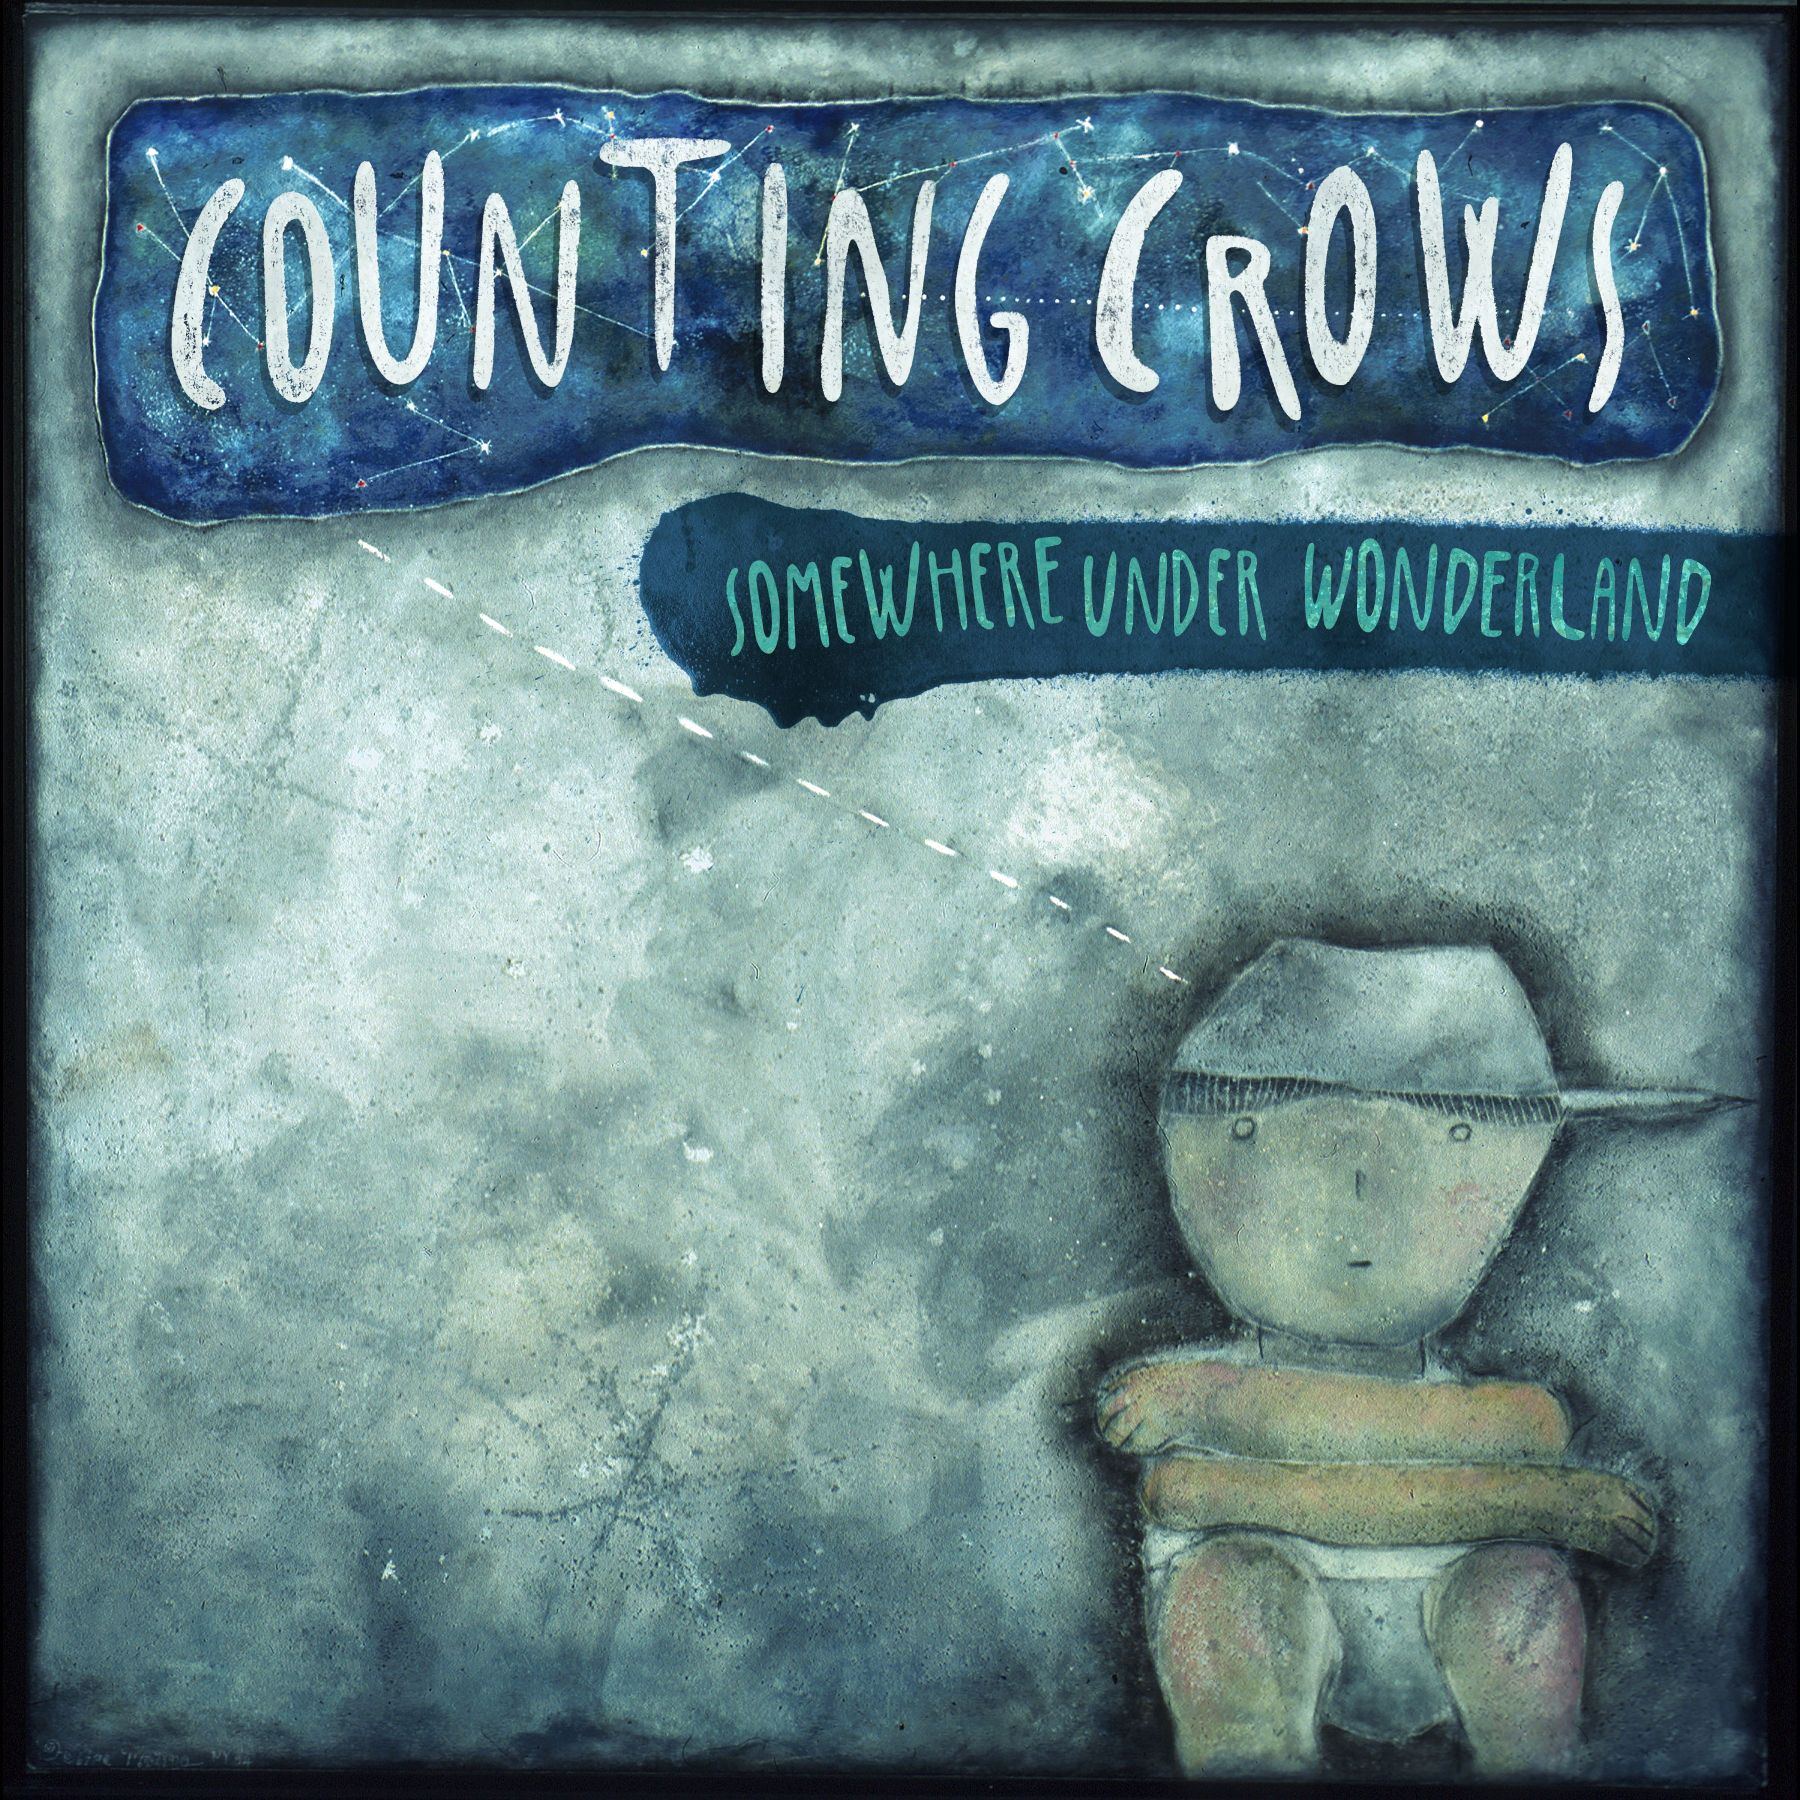 Counting Crows cover album Somewhere under wonderland m